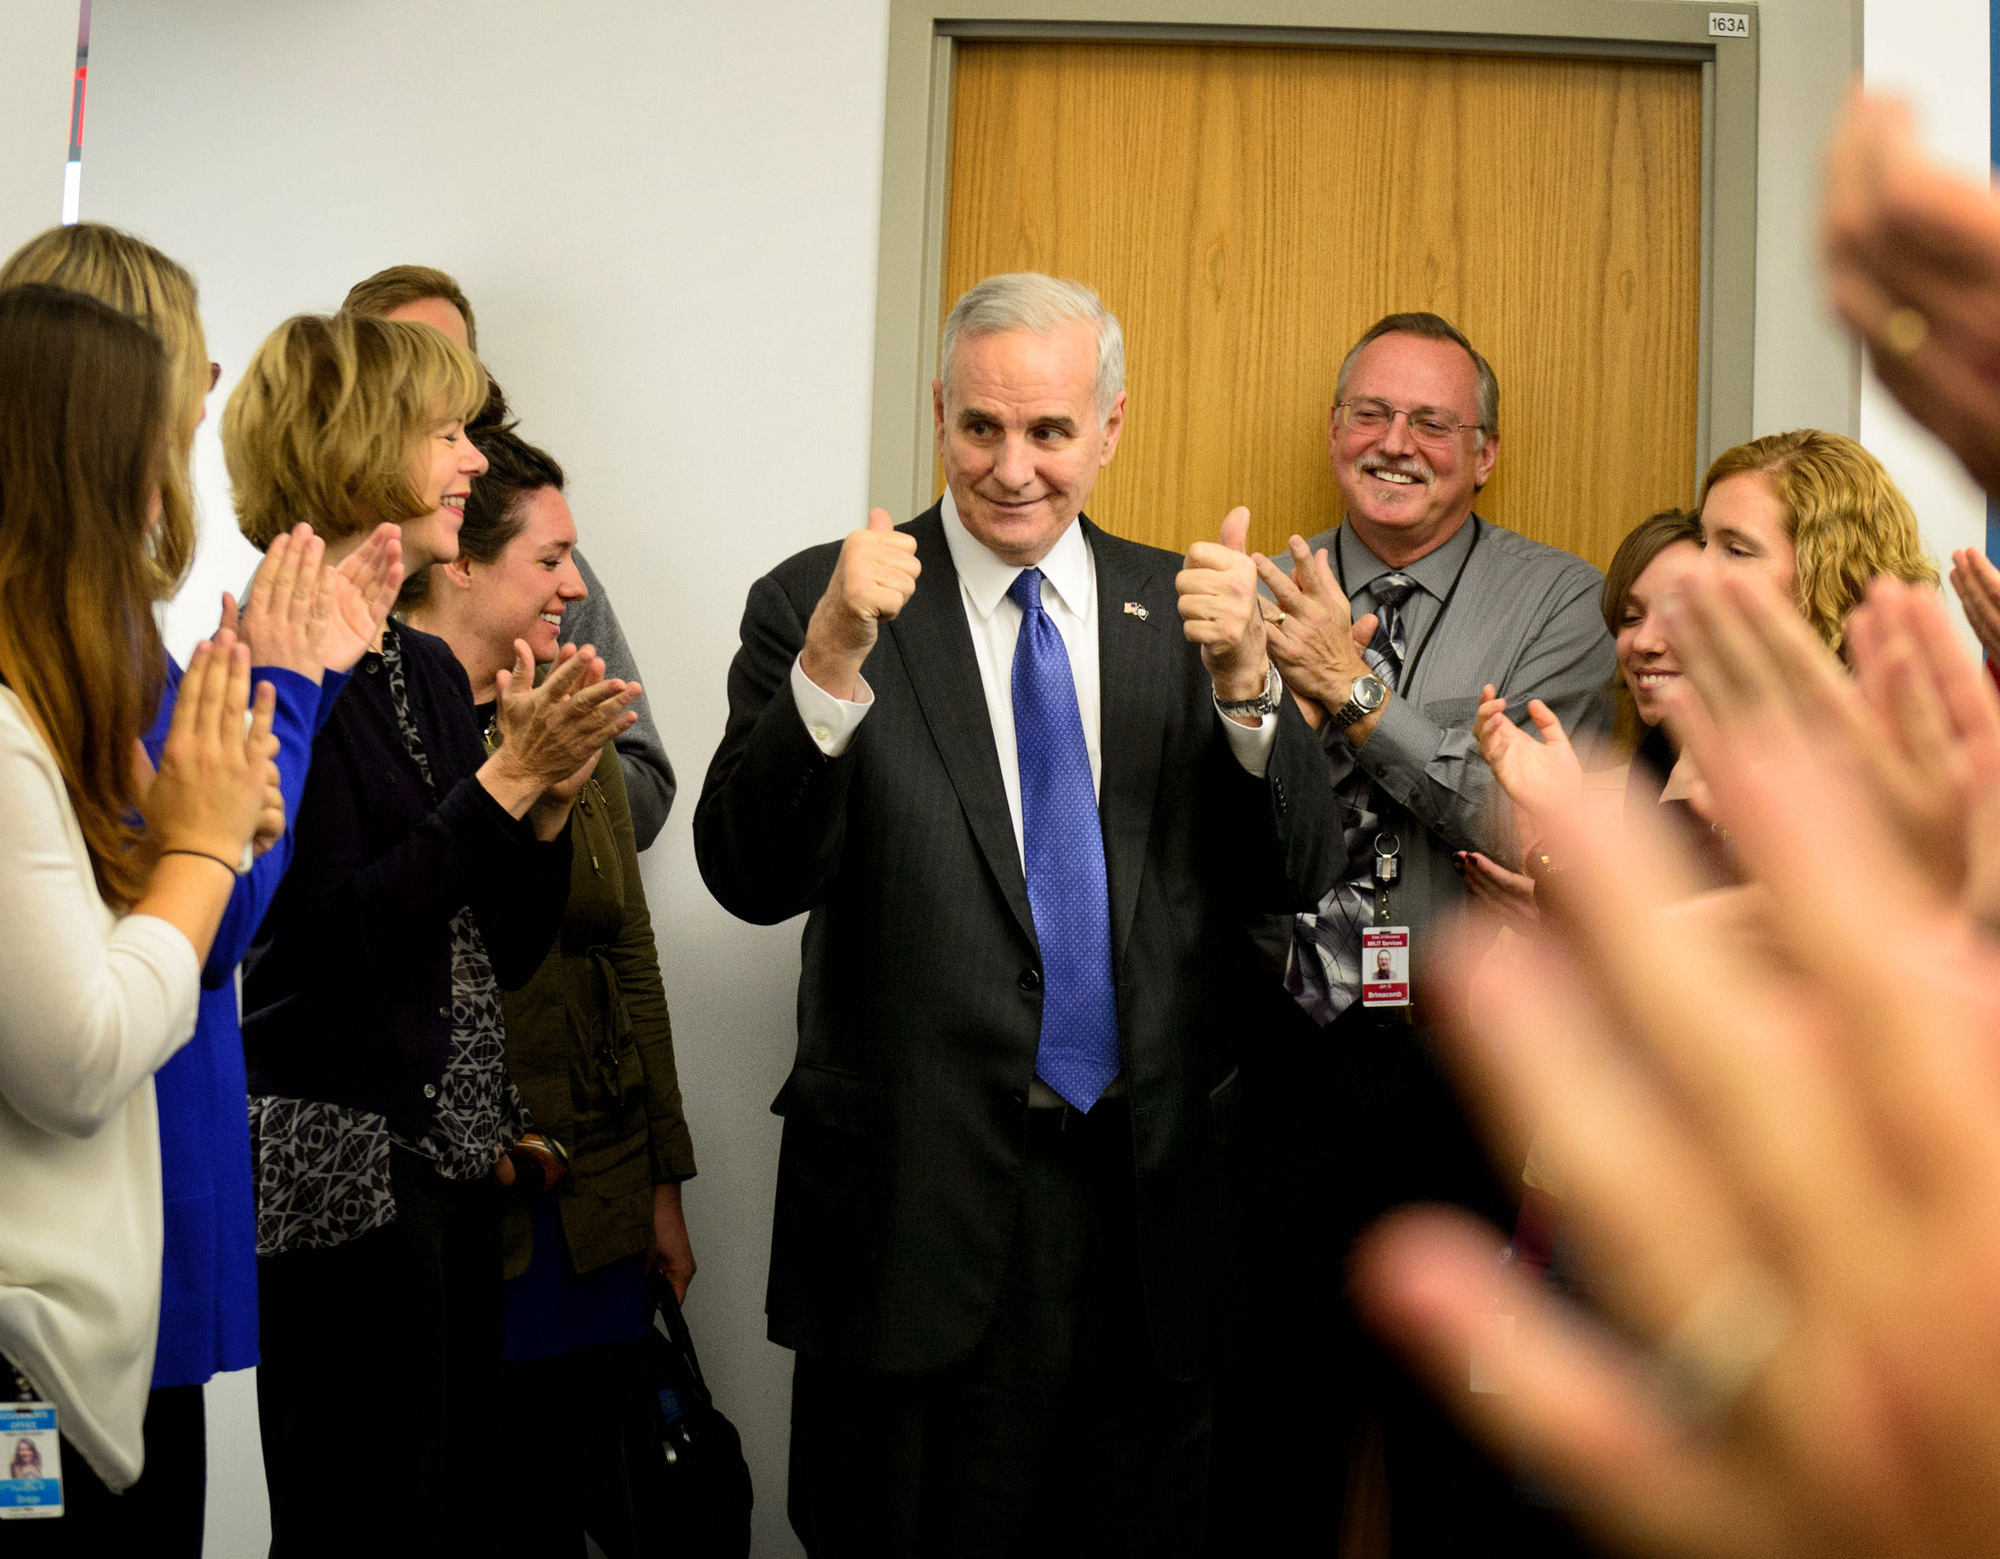 Governor Mark Dayton's message to the Republicans: compromise.